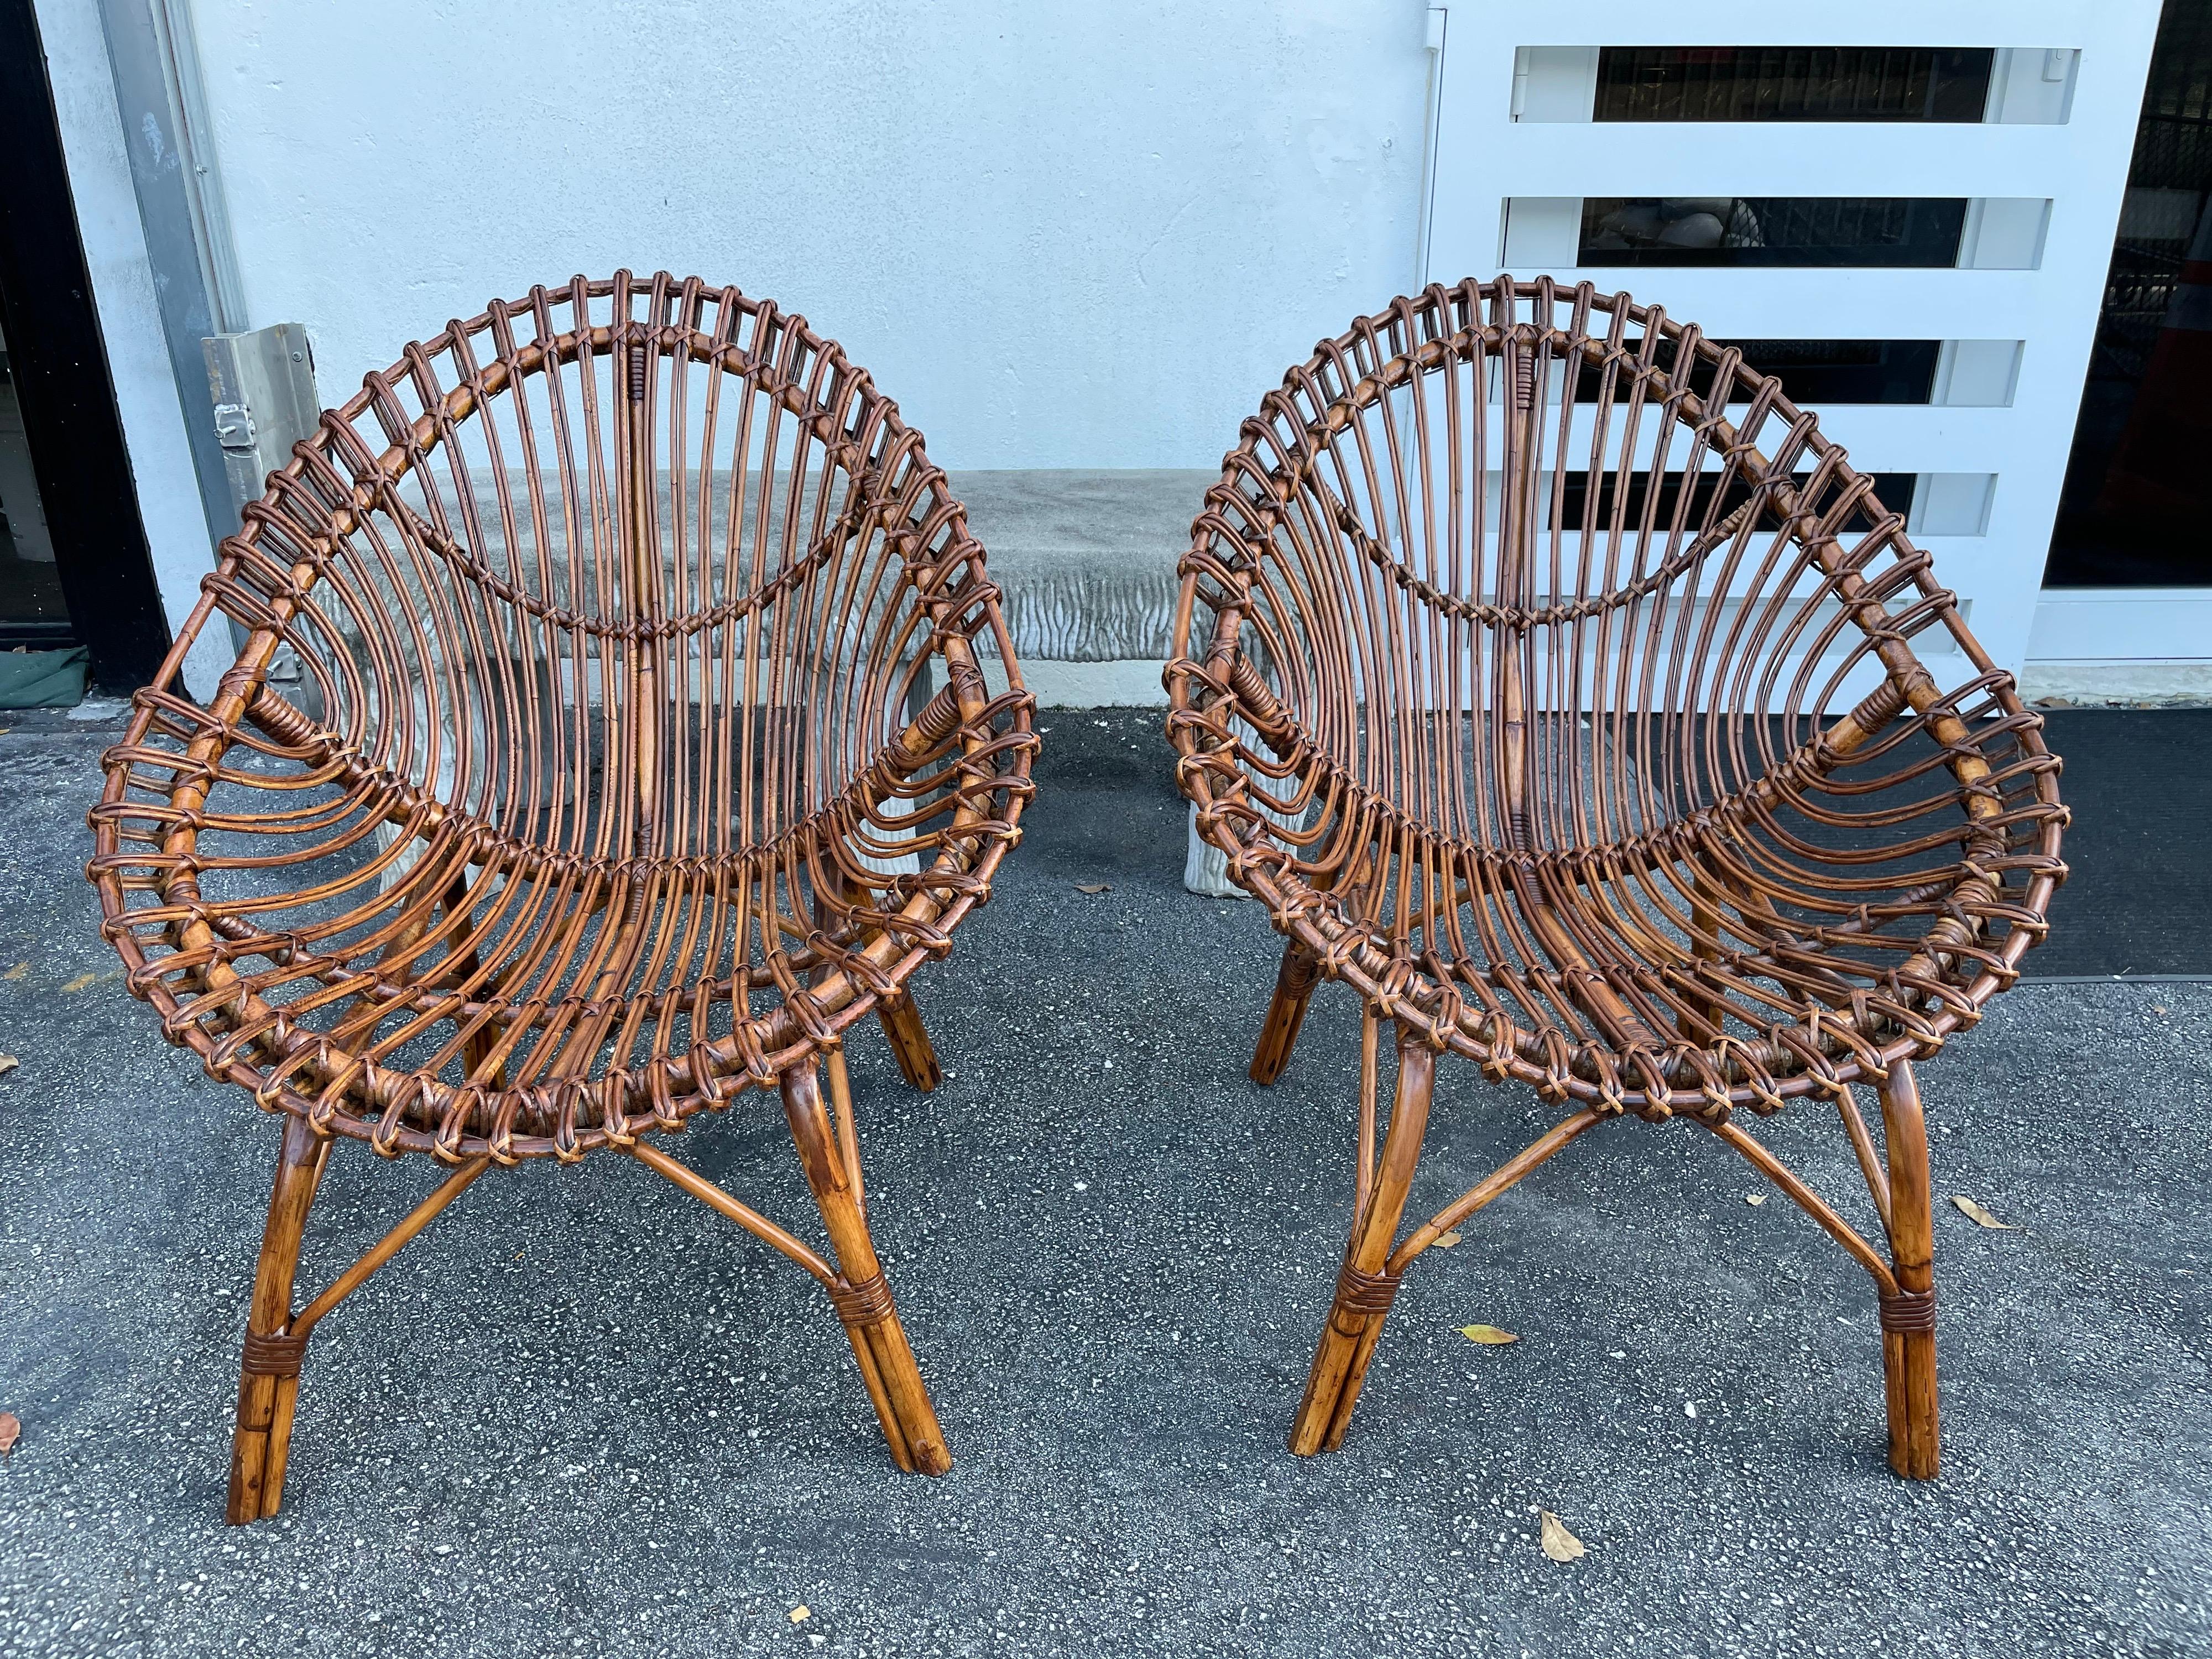 Bent bamboo and rattan for these wonderful scoop design chairs. These have some restoration work to return them to their beautiful original look. The sheepskins shown are only for sampling, they are not included. If you want to purchase them, we can